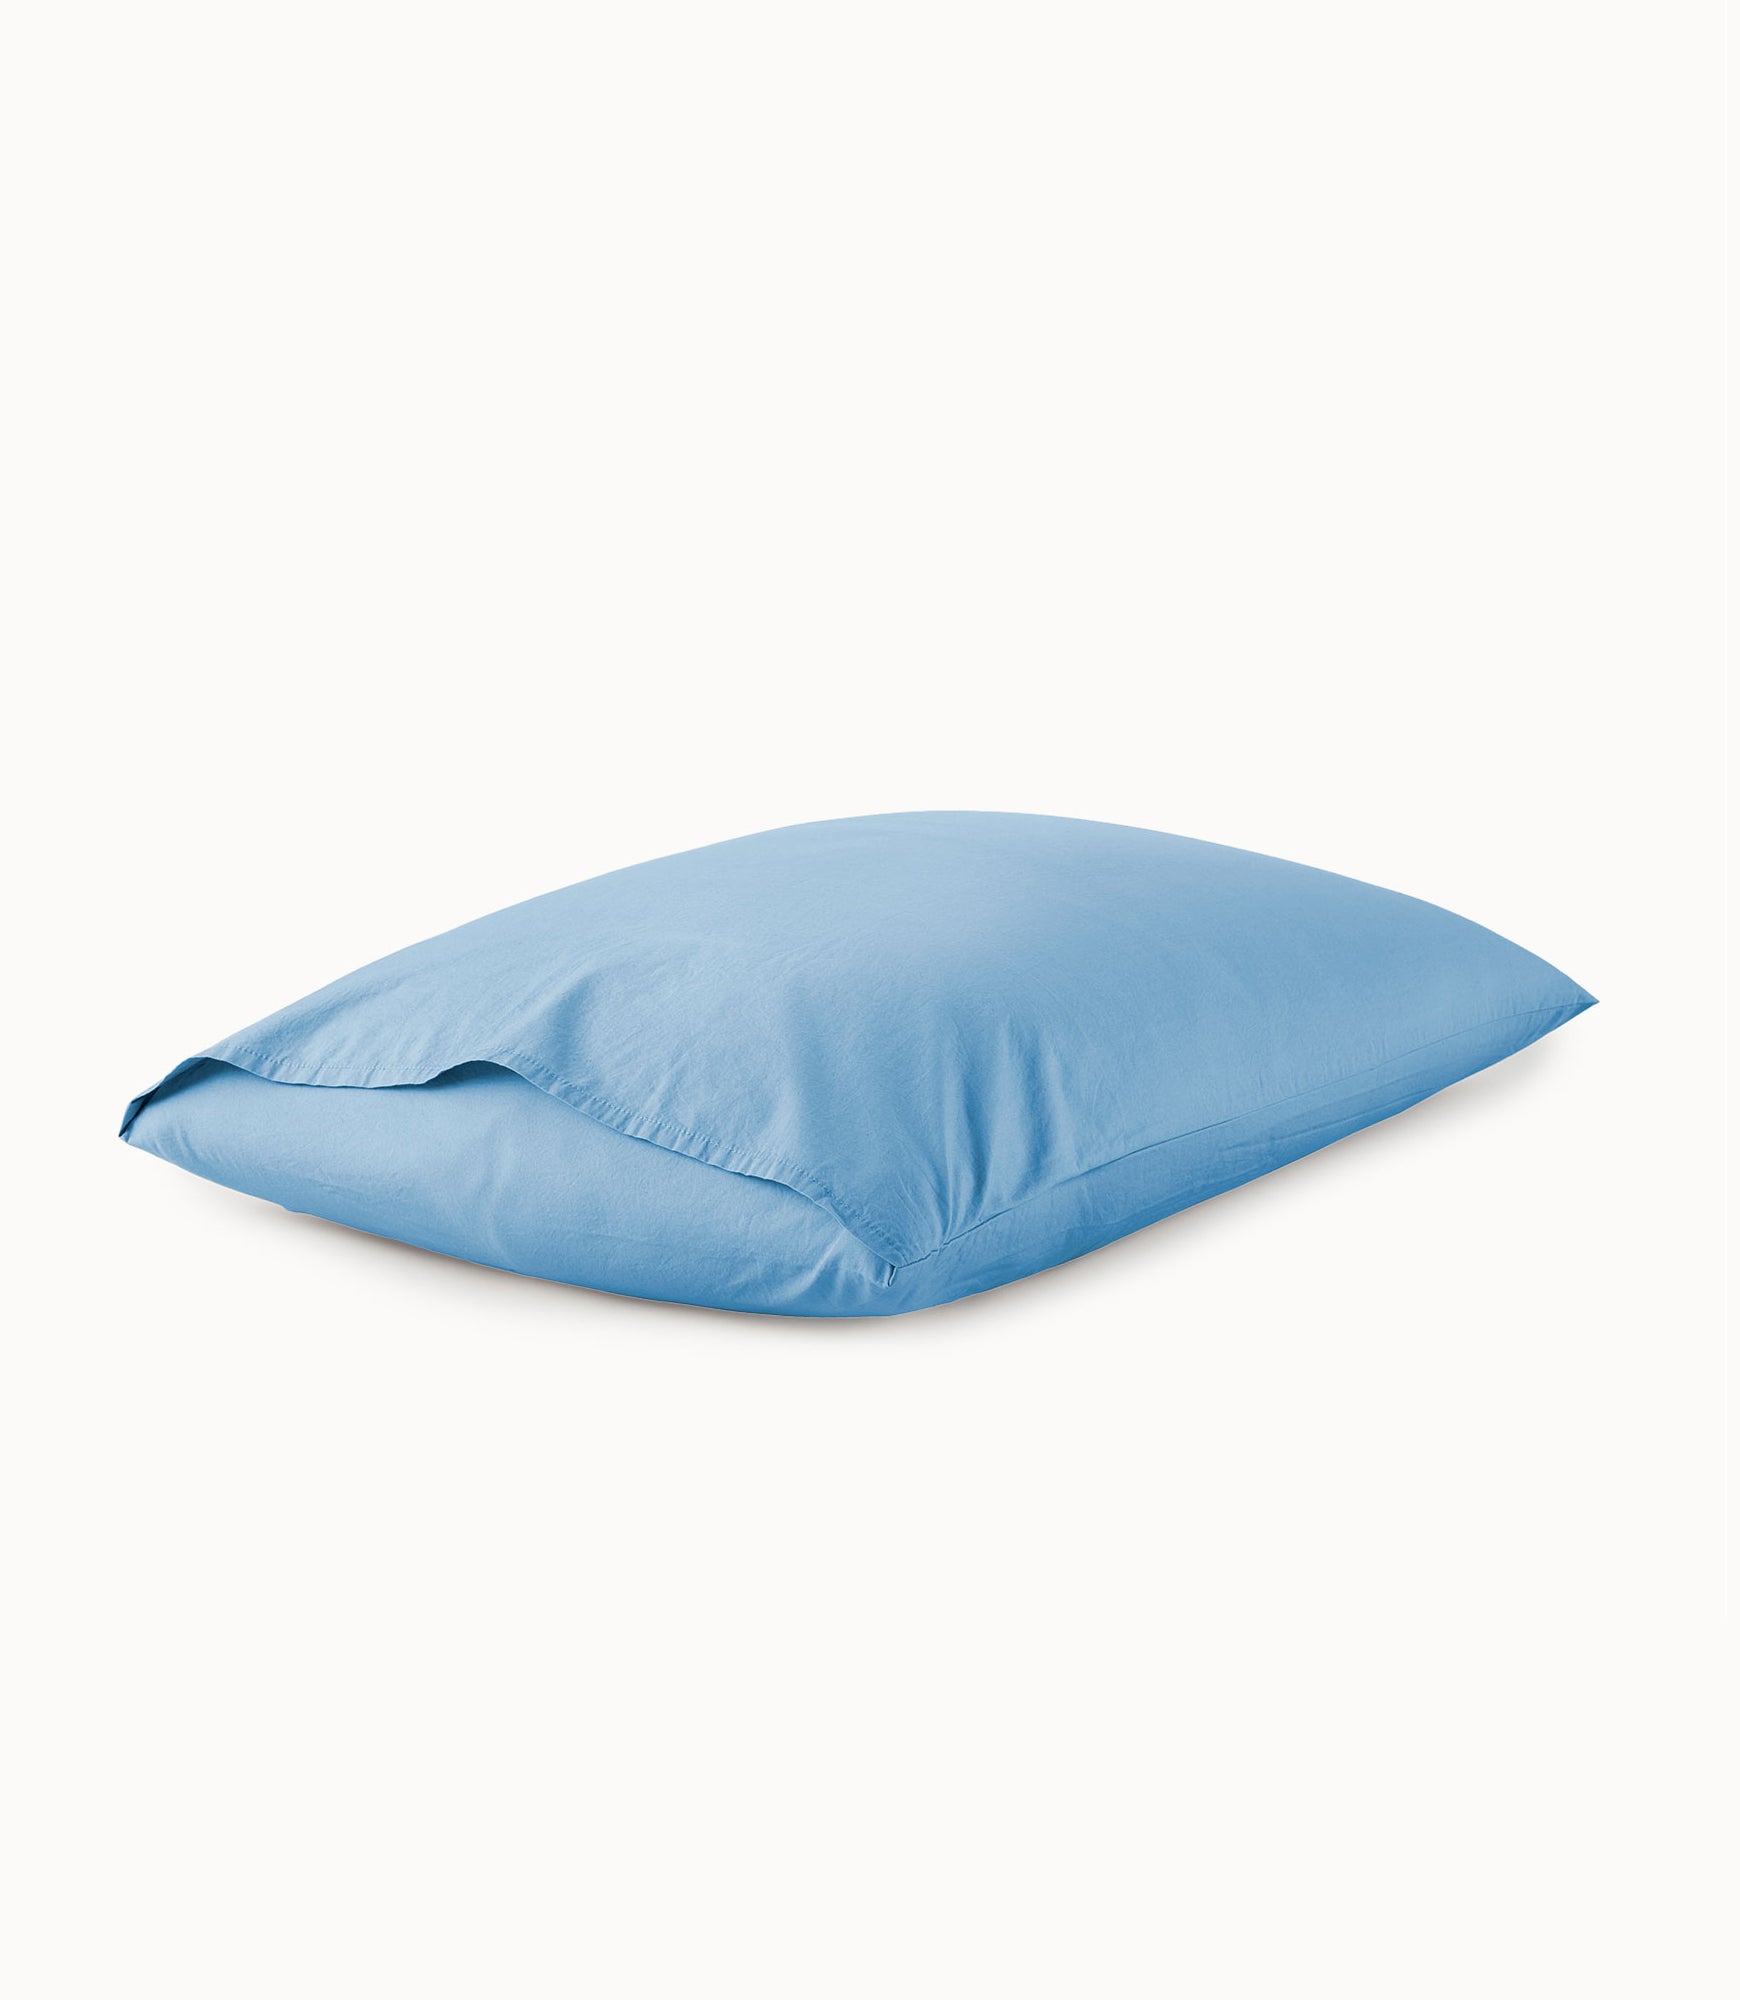 Forty Winks Soft Pillow